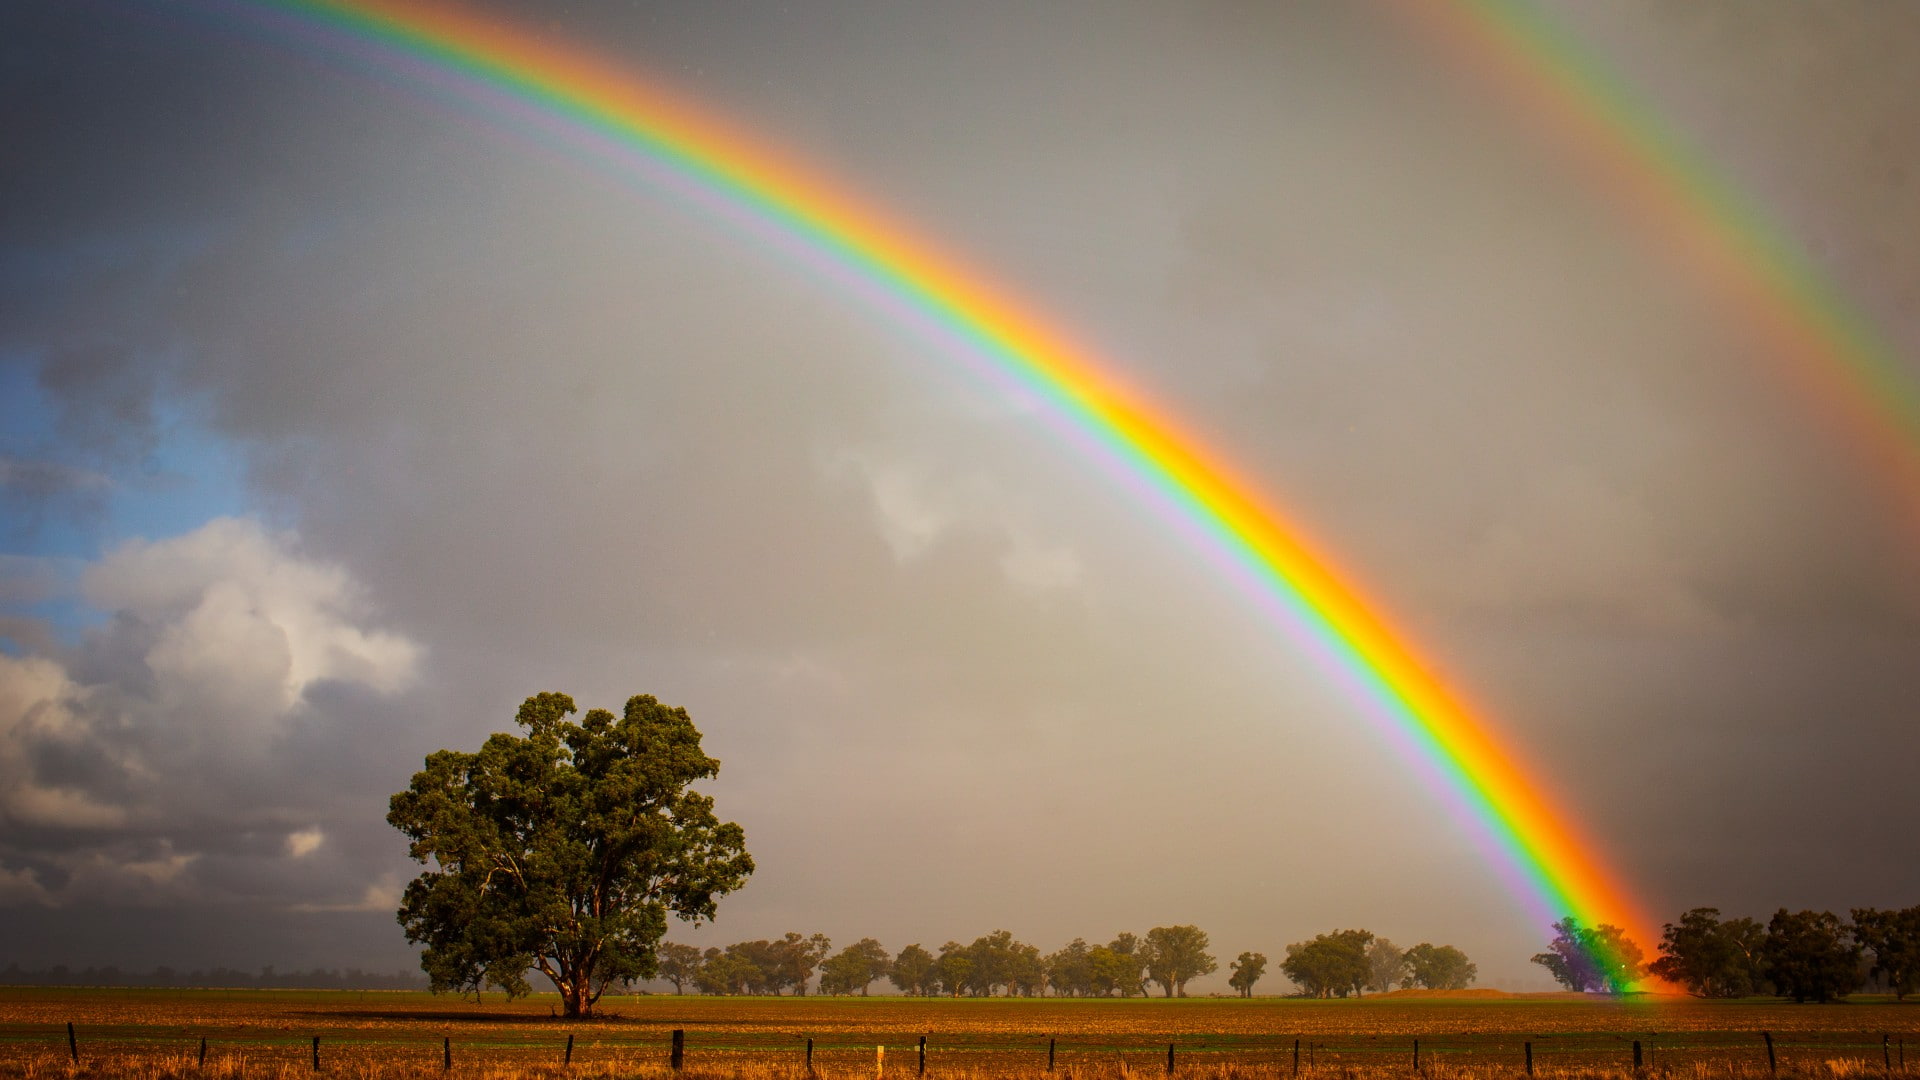 Two rainbows are seen over a barren field, with a tree in the left hand corner of the image. Photo: Paul Jones